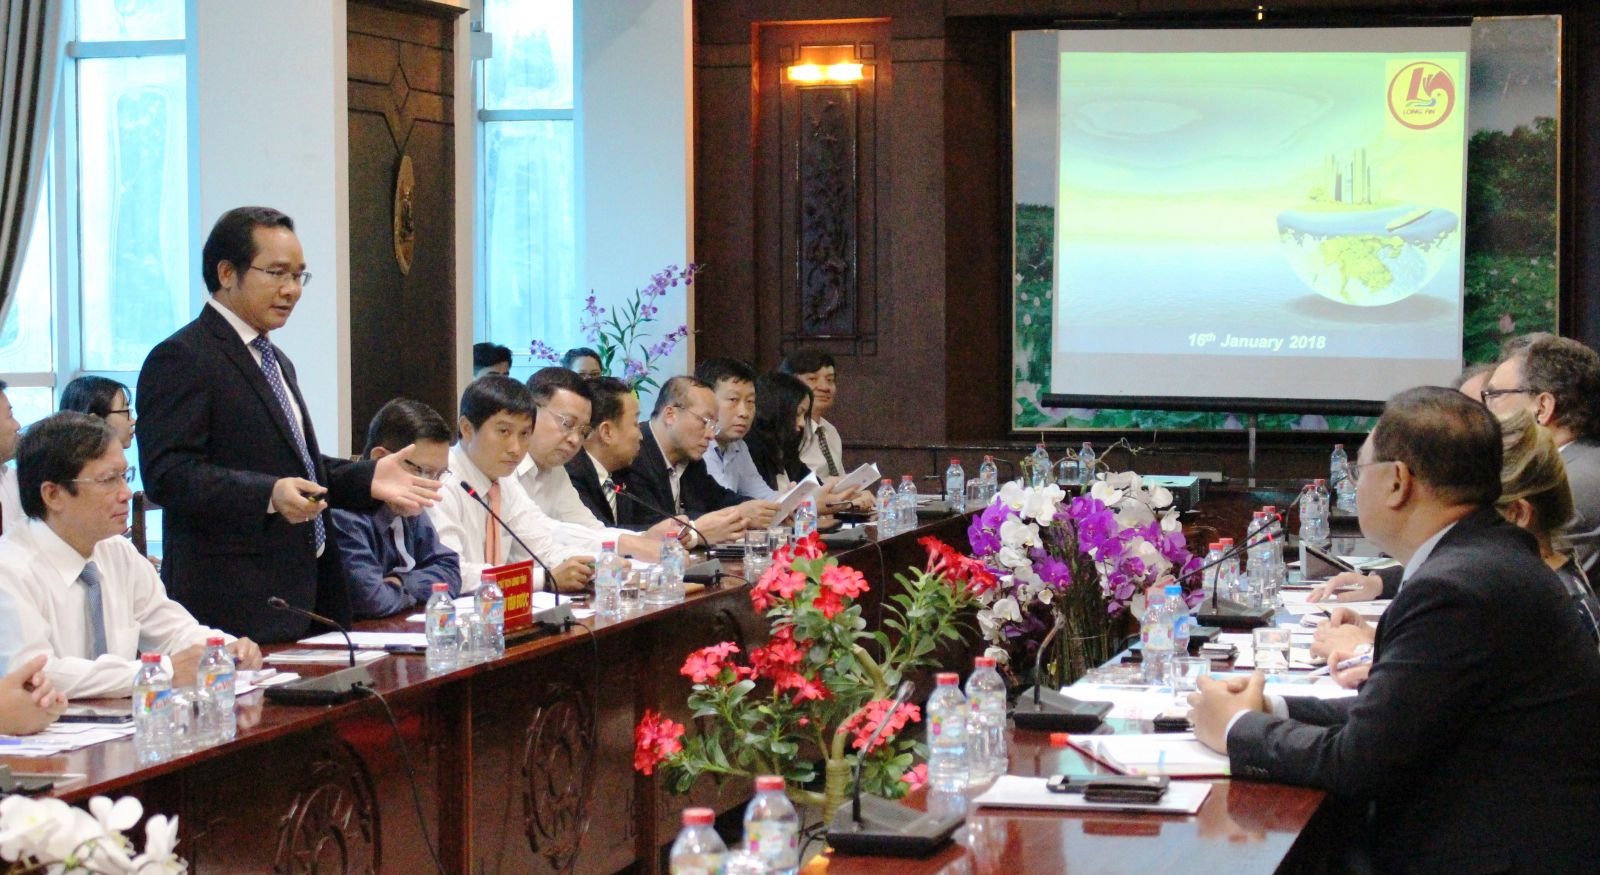 Deputy Chairman of People’s Committee Nguyen Van Duoc introduced the province’s potentials, advantages, development orientation and preferential policies to attract investment